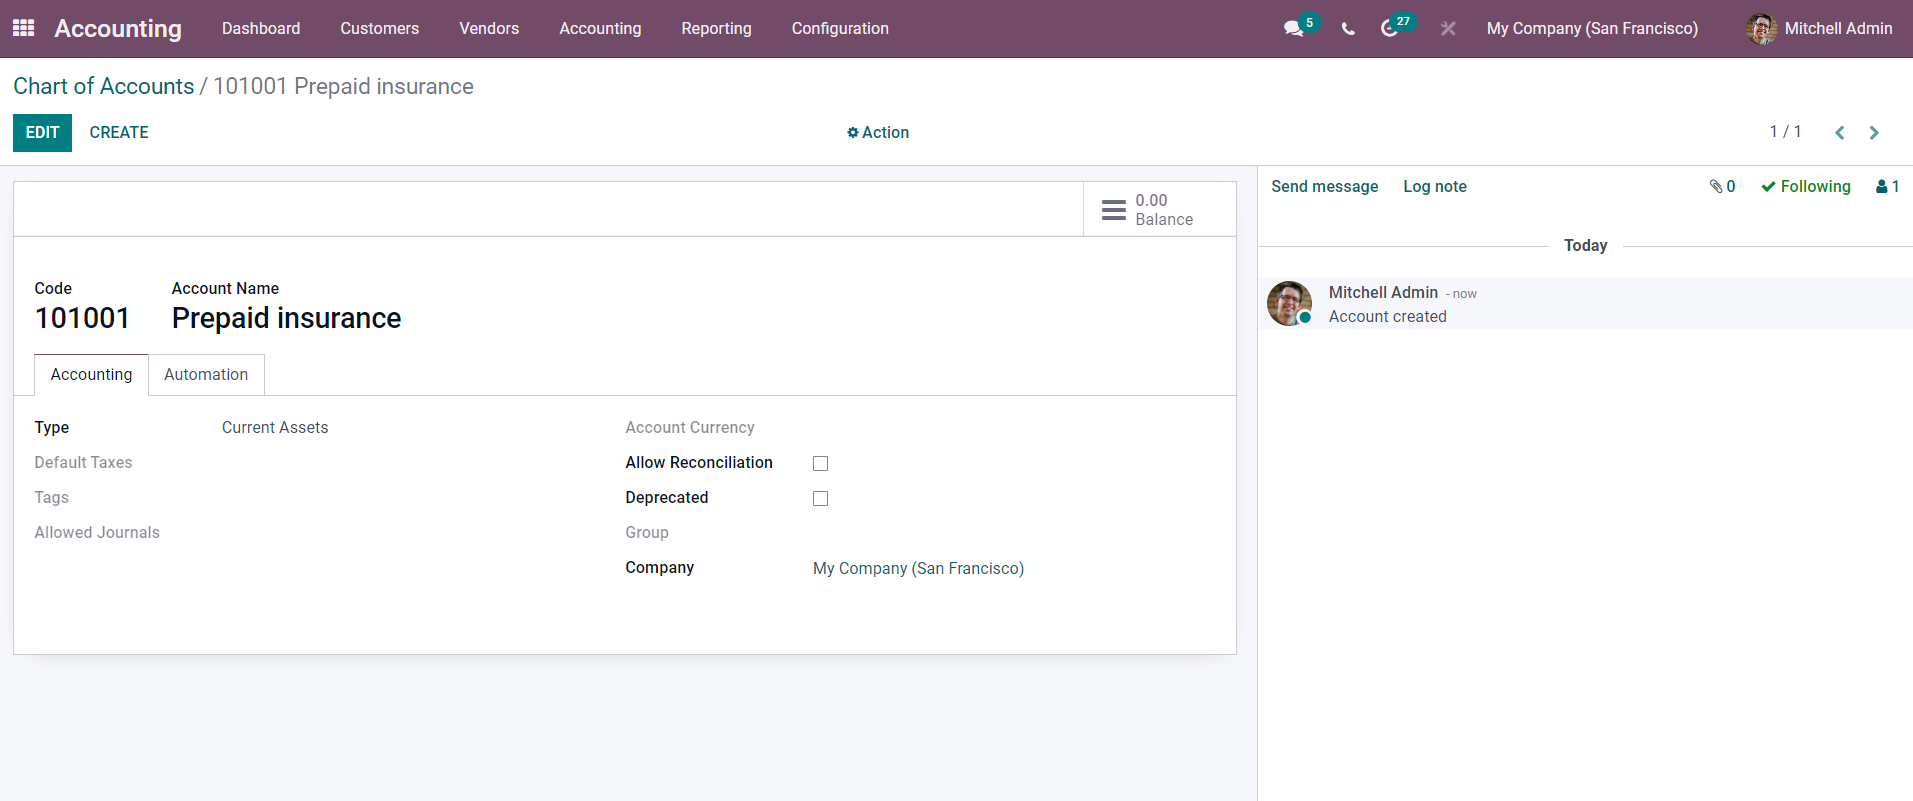 how-to-create-manage-the-deferred-expense-models-in-odoo-15-accounting-cybrosys